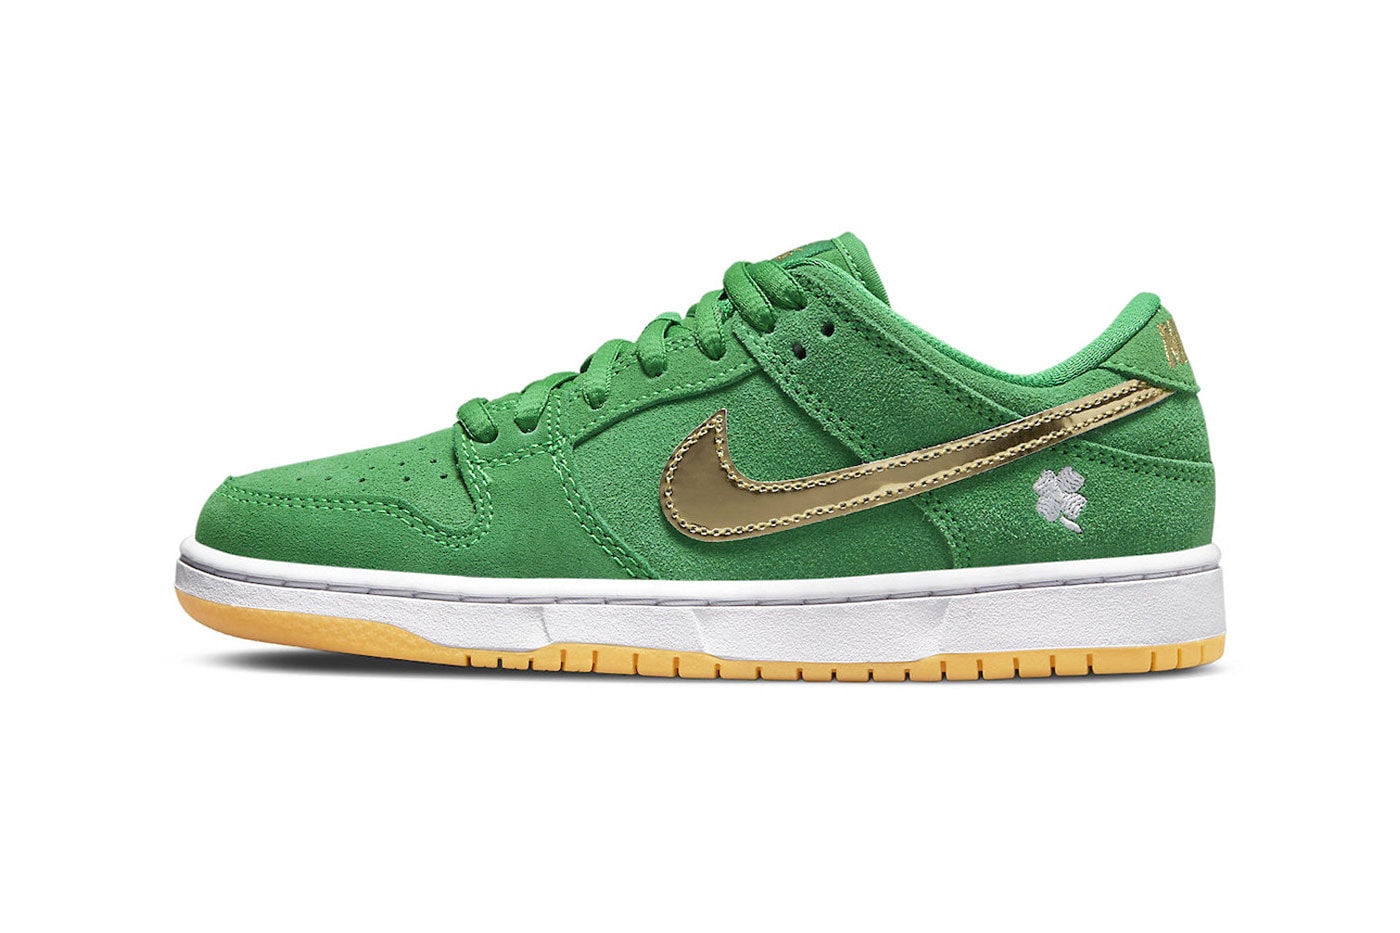 Nike Gears up for St. Patrick's Day With New Green and Gold SB Dunk Low Release BQ6817-303 release info shoes skater 